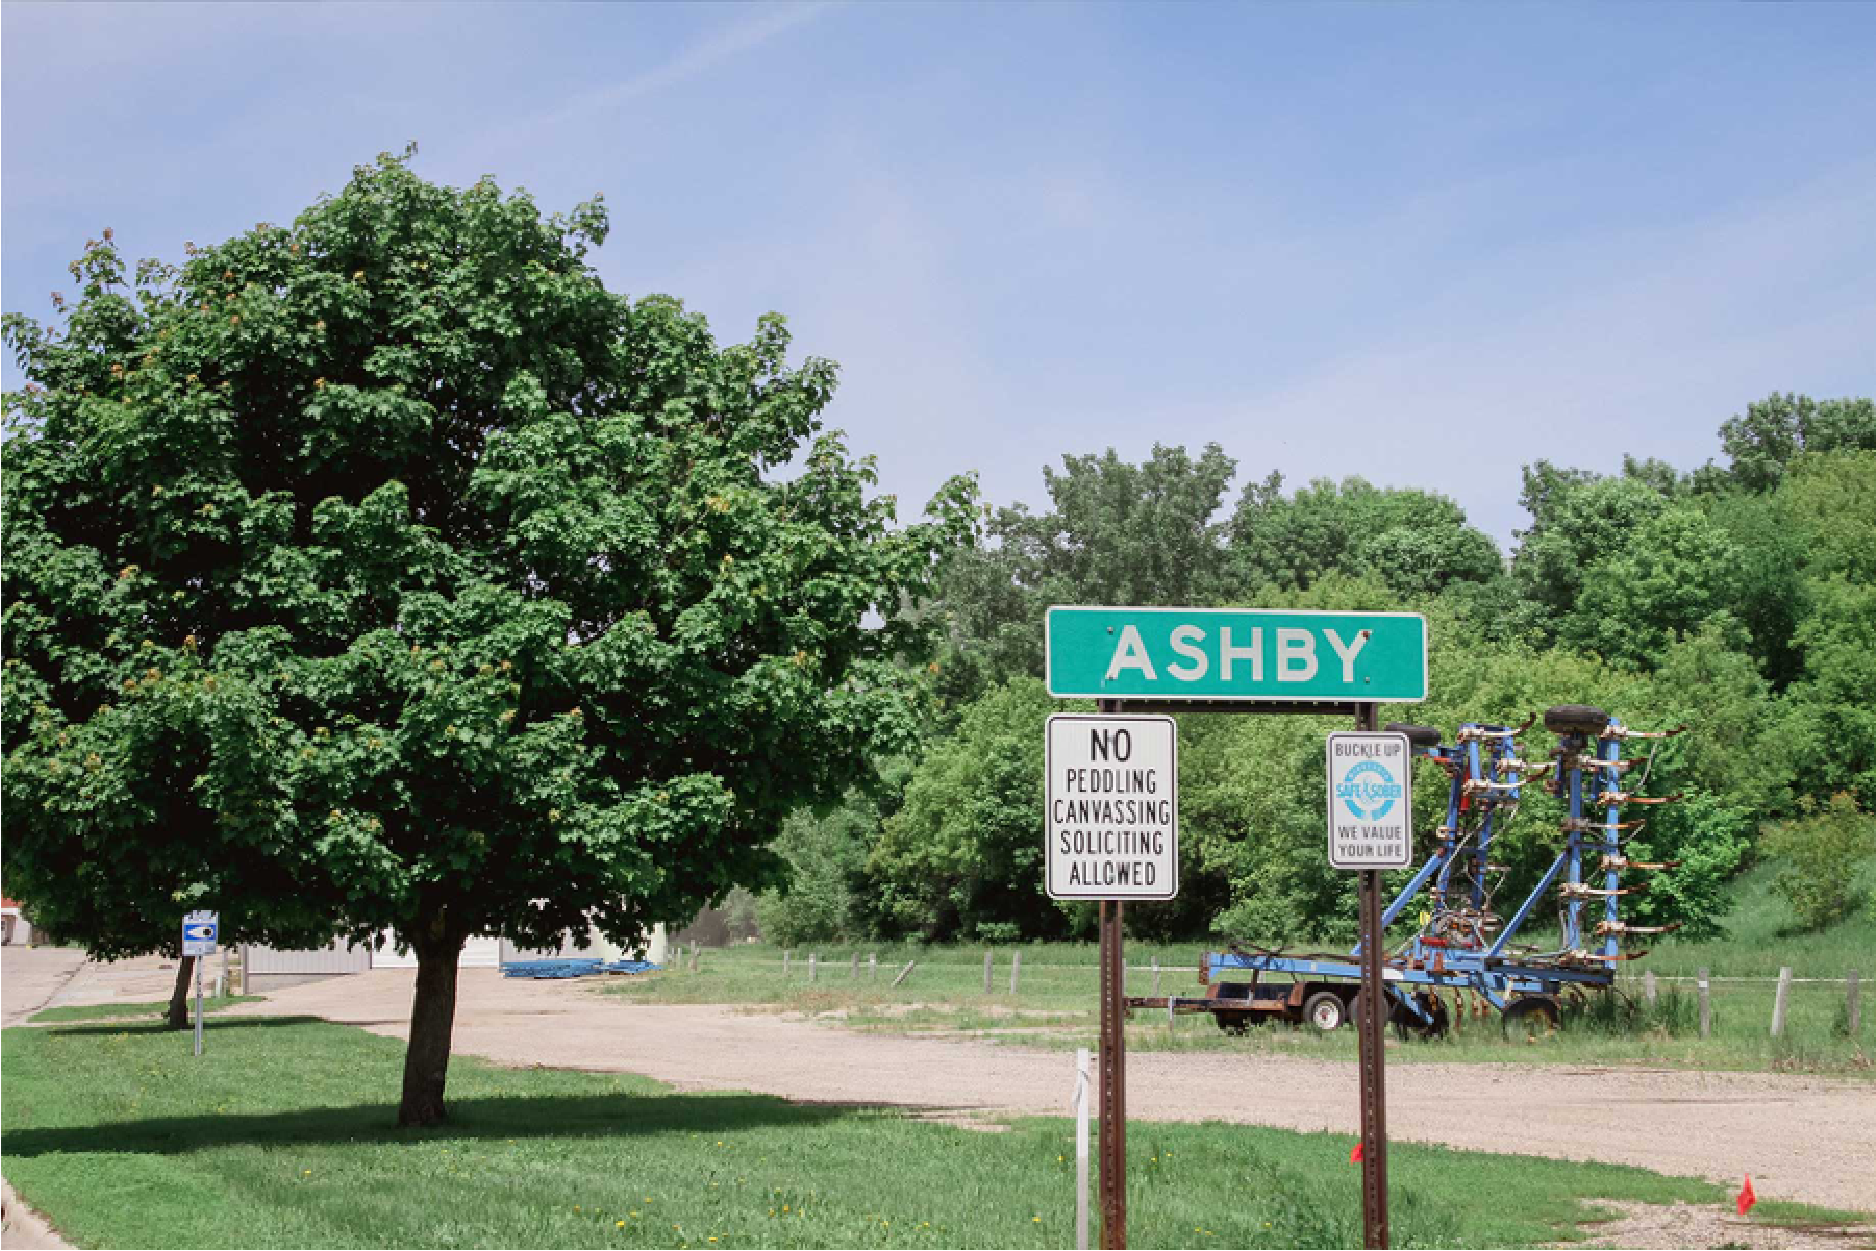 Hometown Help: Unique Community Fund Enables Town of Ashby to Take Care of Their Own During COVID-19 Crisis